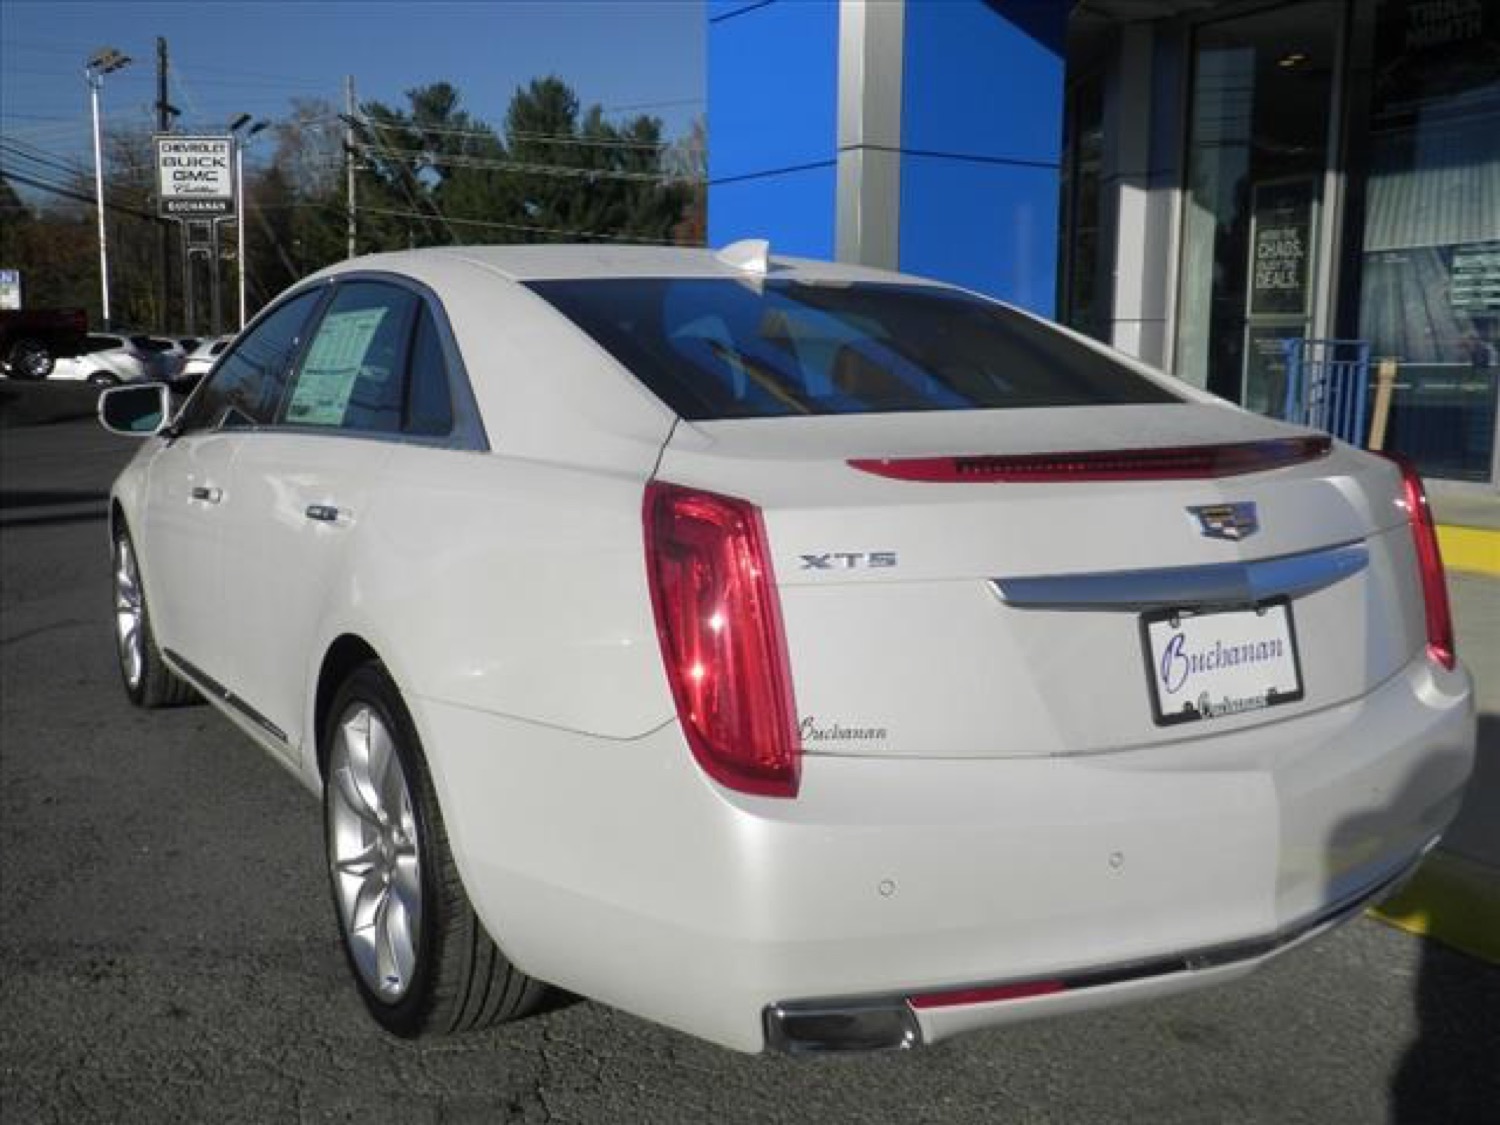 Brand-New 2016 Cadillac XTS For Sale At Pennsylvania Dealer | GM Authority